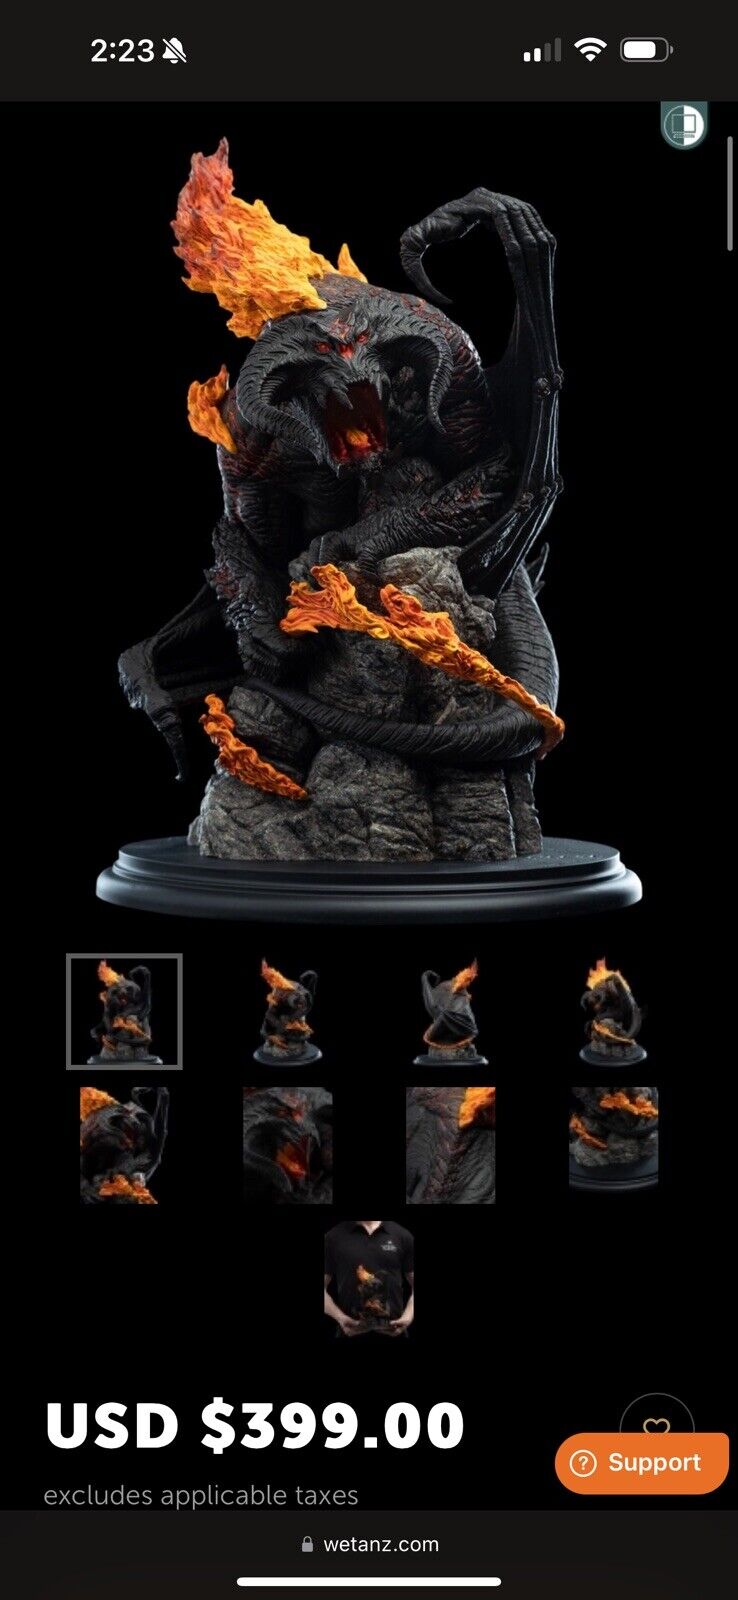 The Balrog | Lord of the Rings 20th Anniversary Statue by Weta Workshop